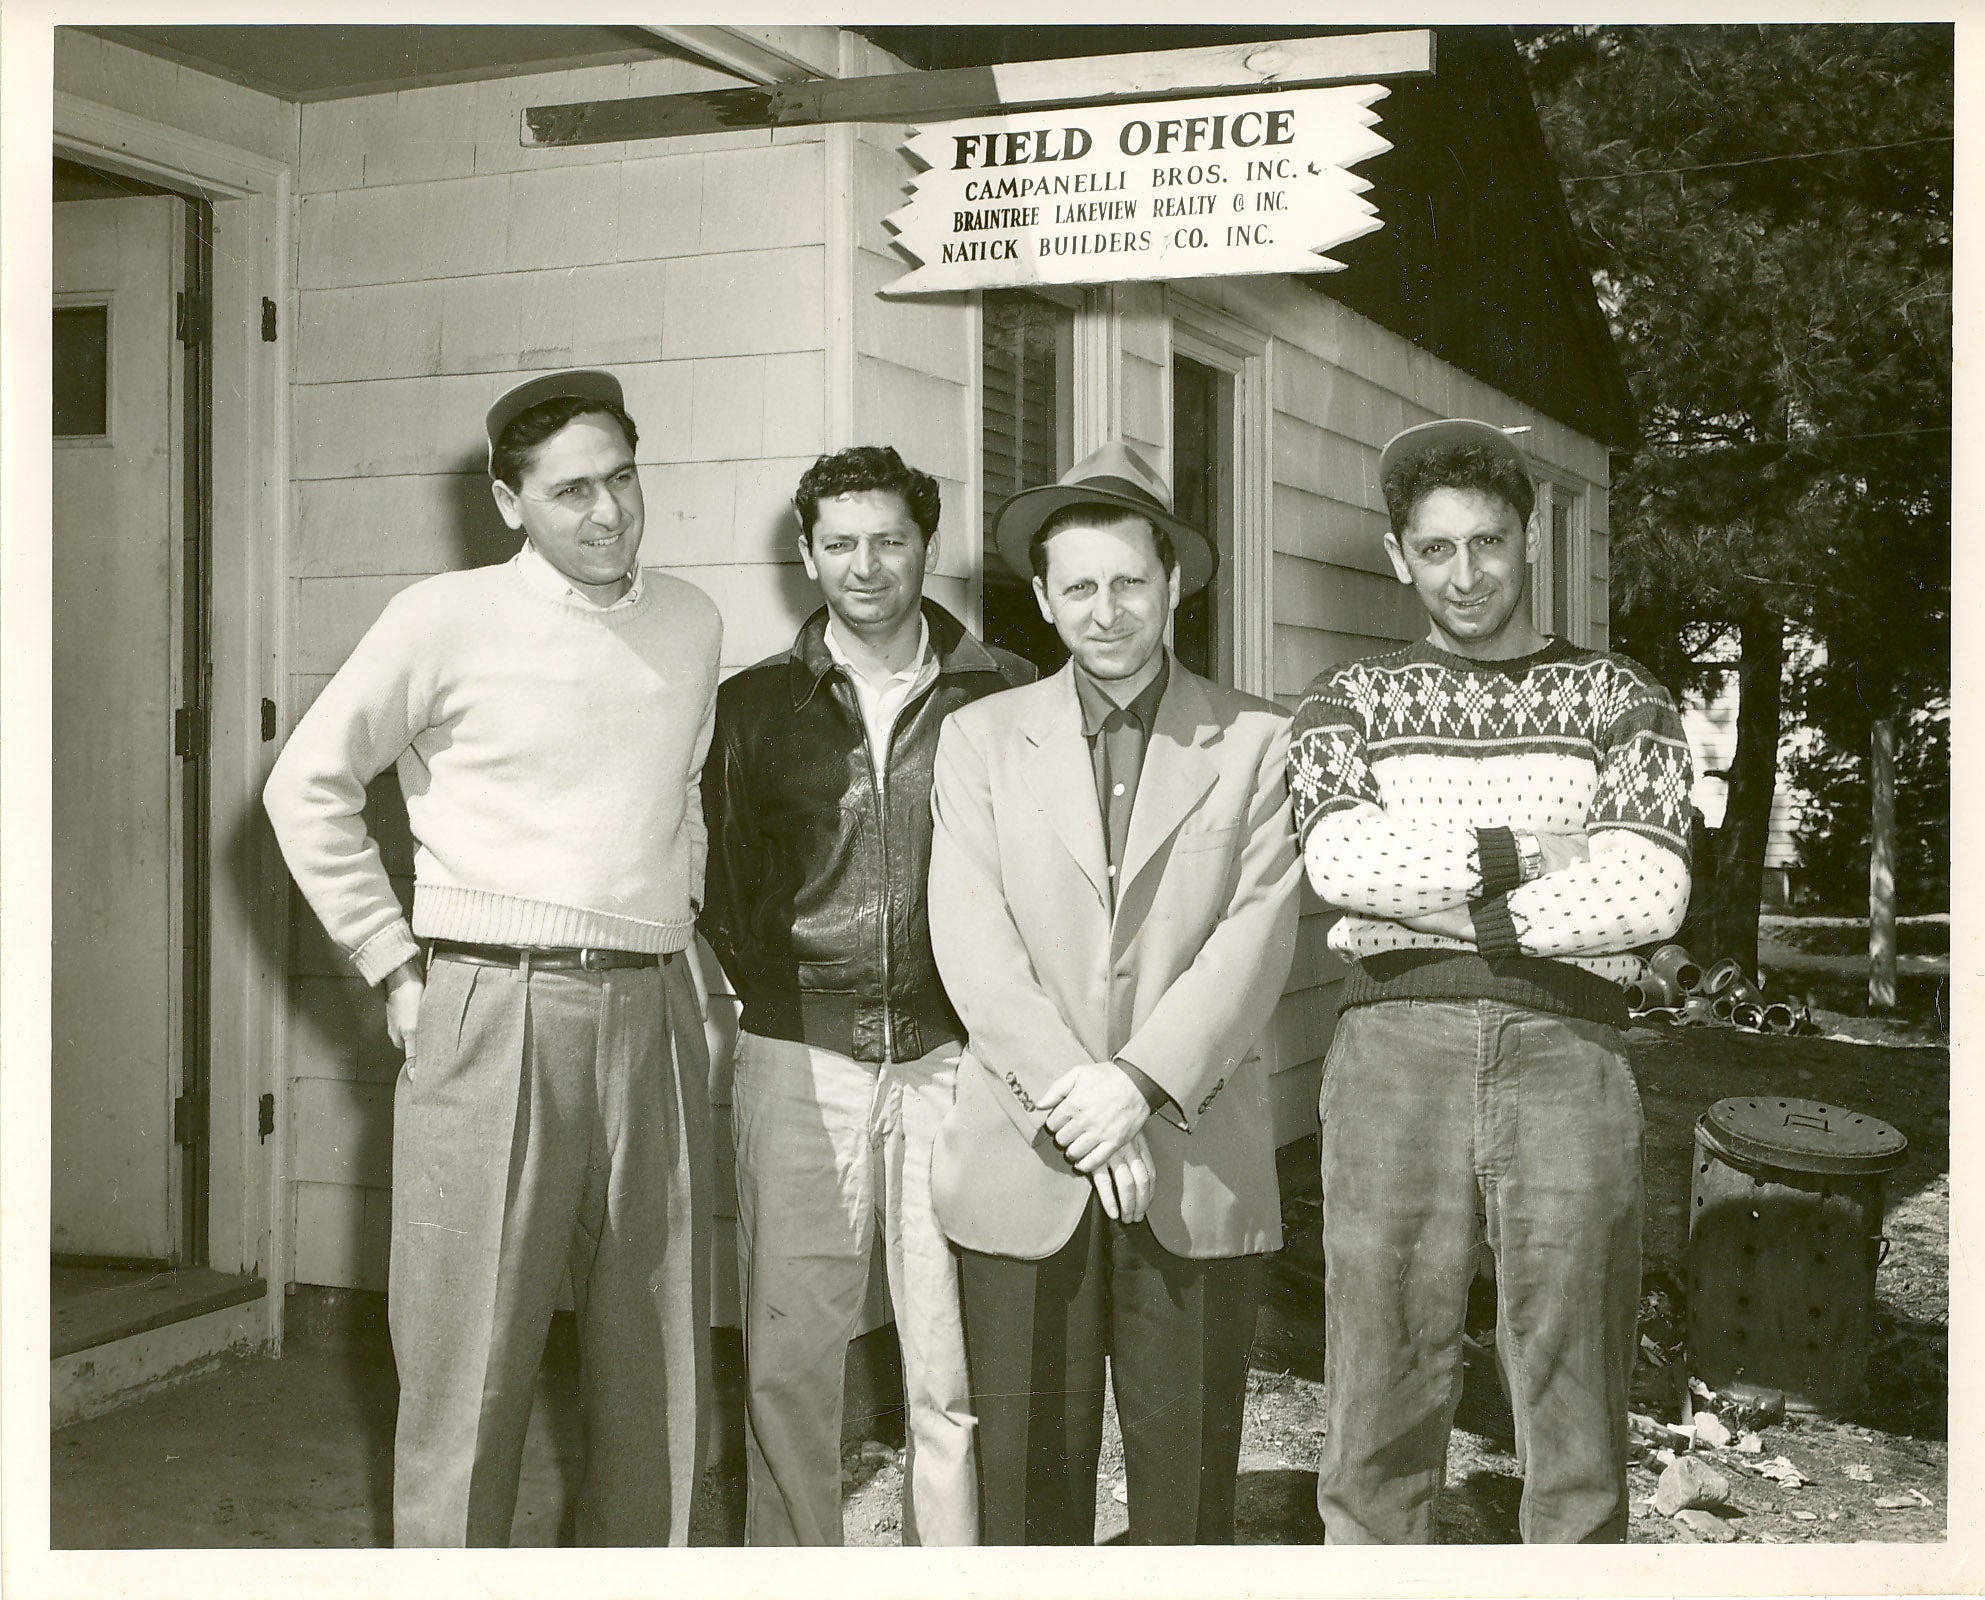 The Campanelli brothers (from left to right) in 1950: Nicholas, Alfred, Michael, and Joseph.